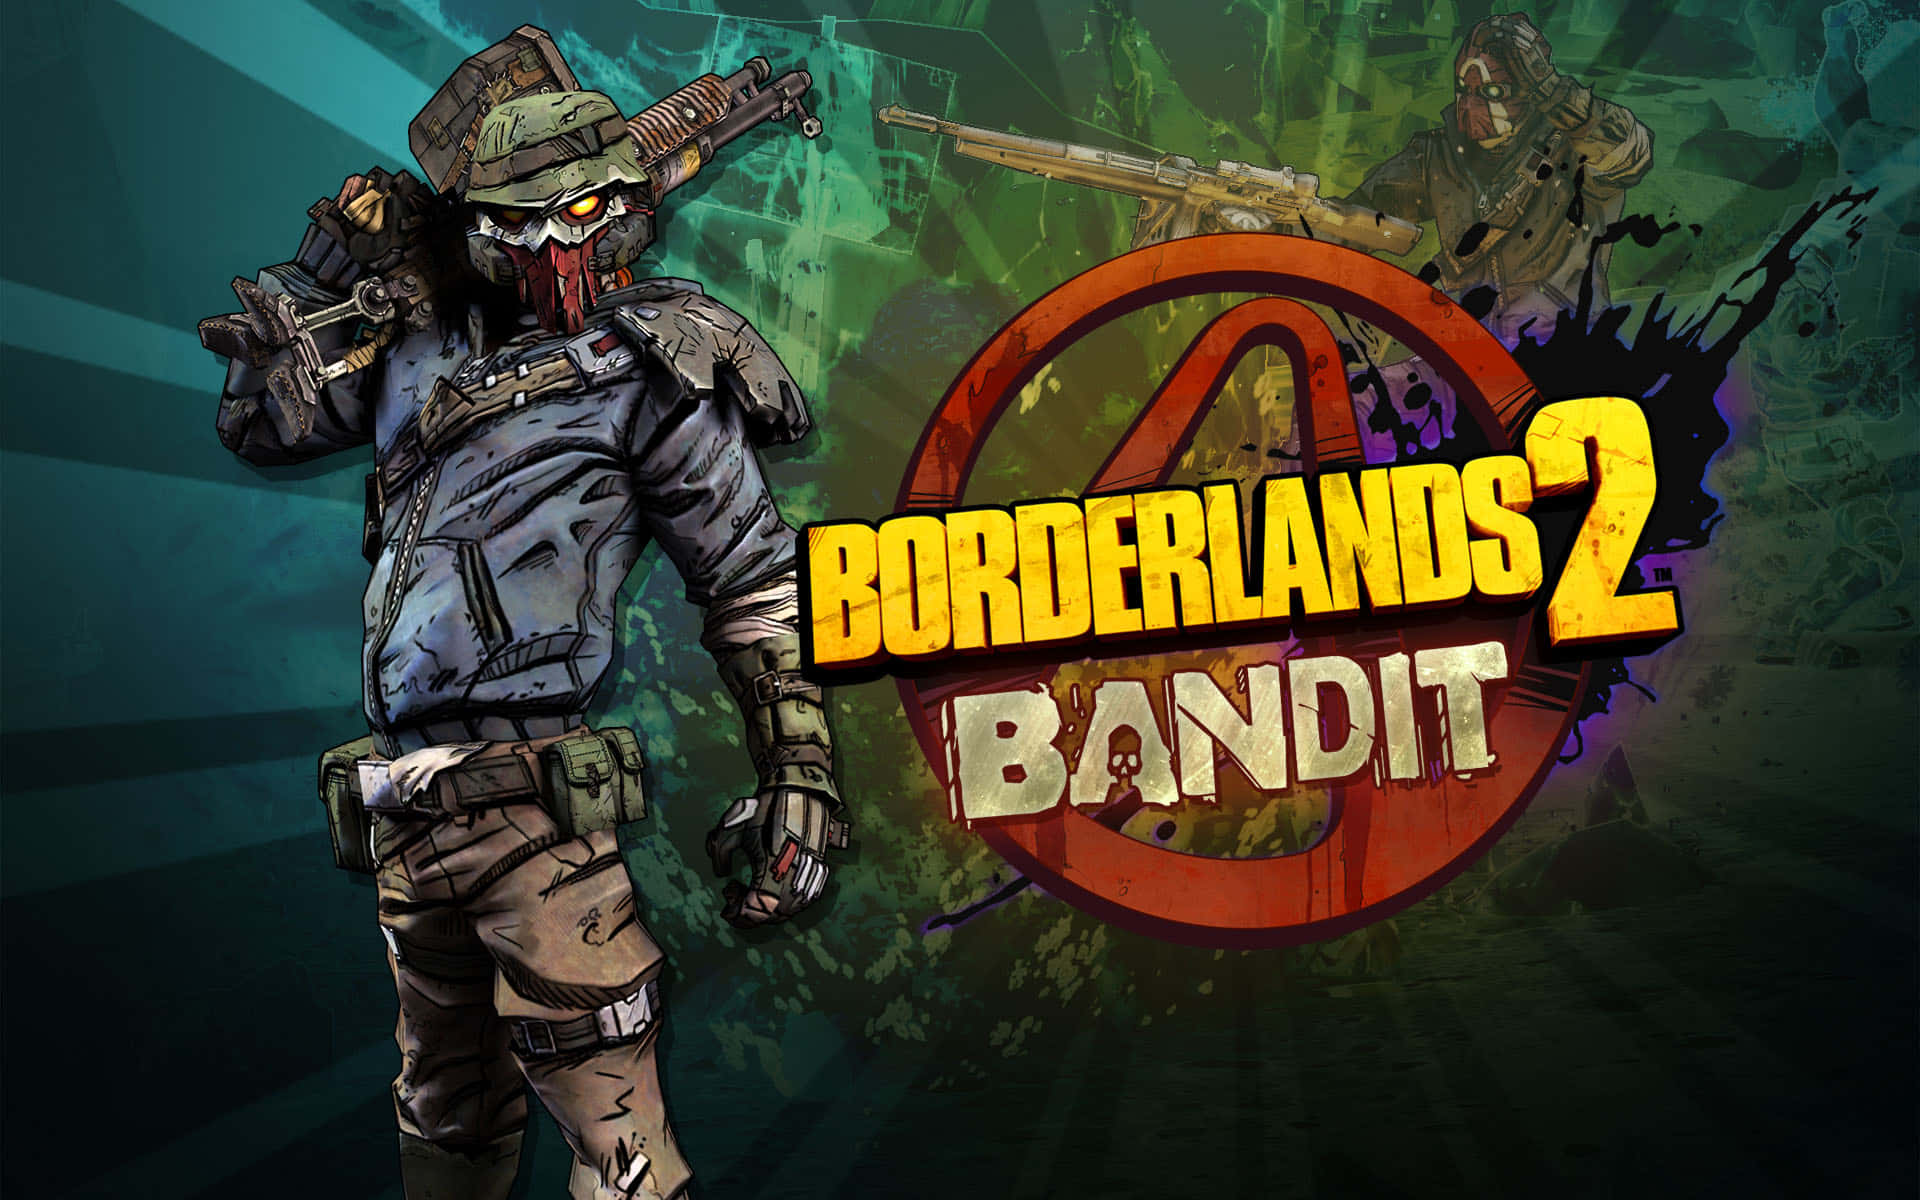 Exciting adventure awaits in the world of Borderlands